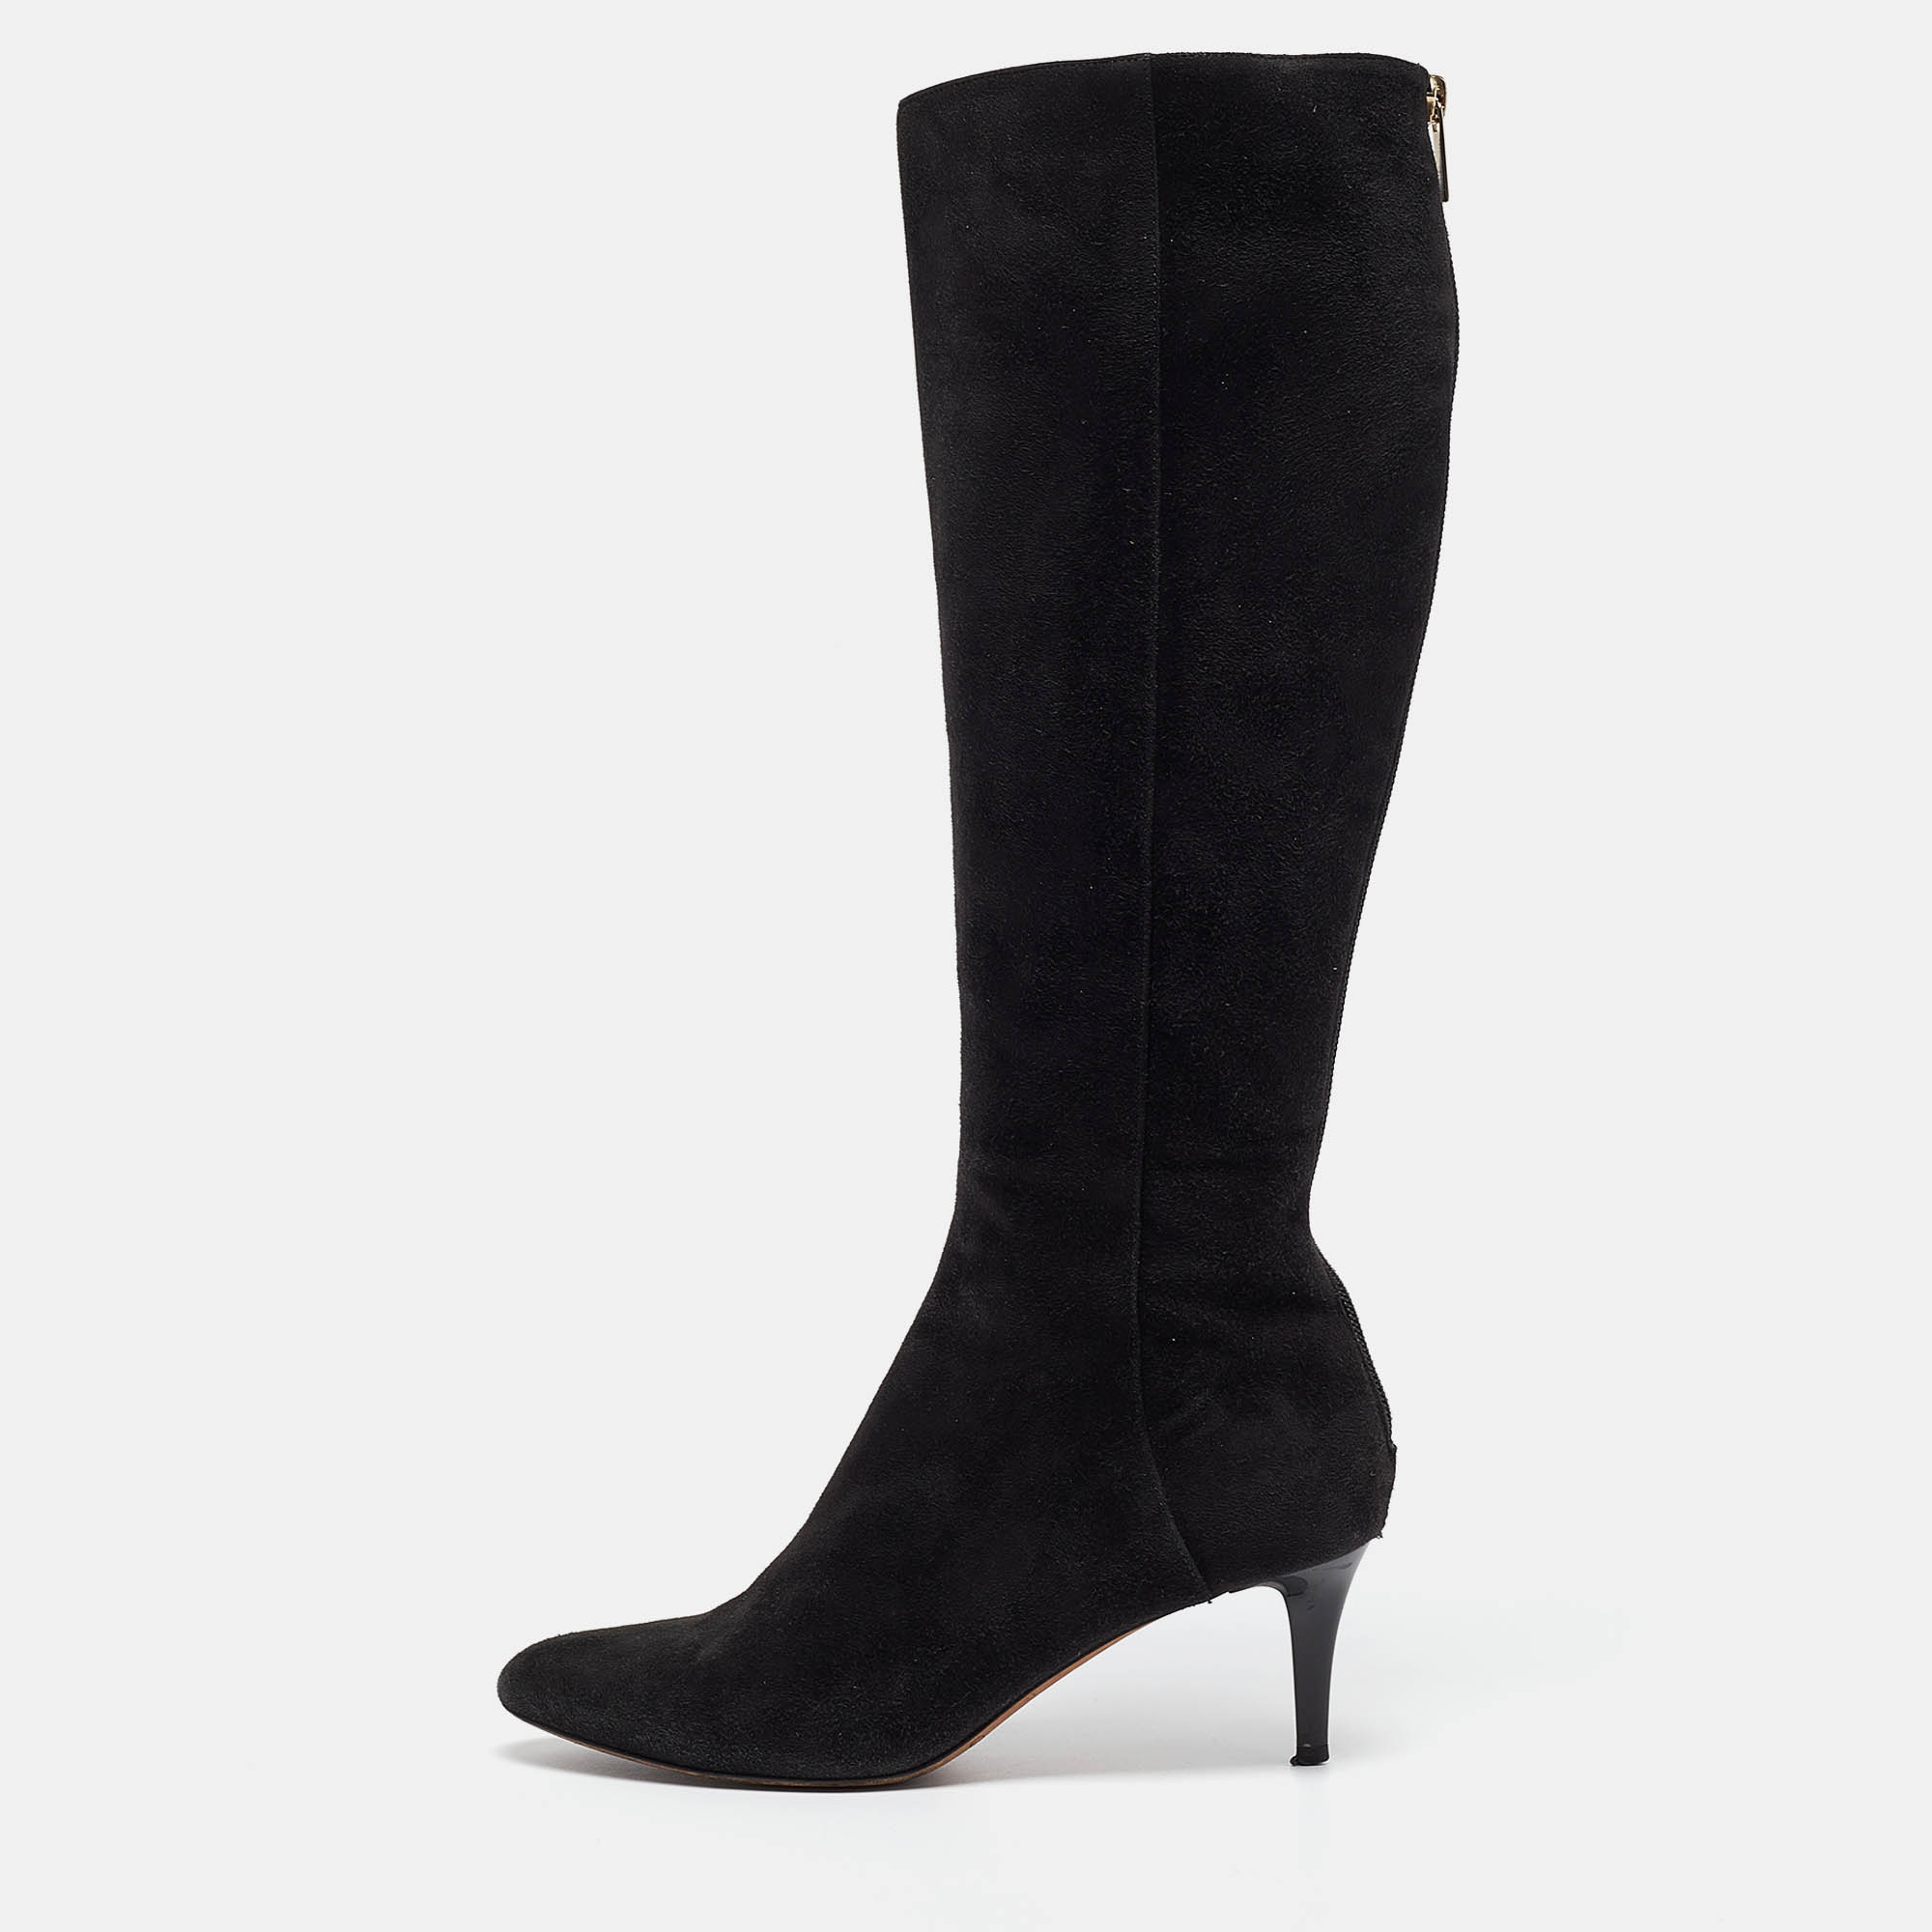 Jimmy Choo Black Suede Pointed Toe Knee Length Boots Size 36.5